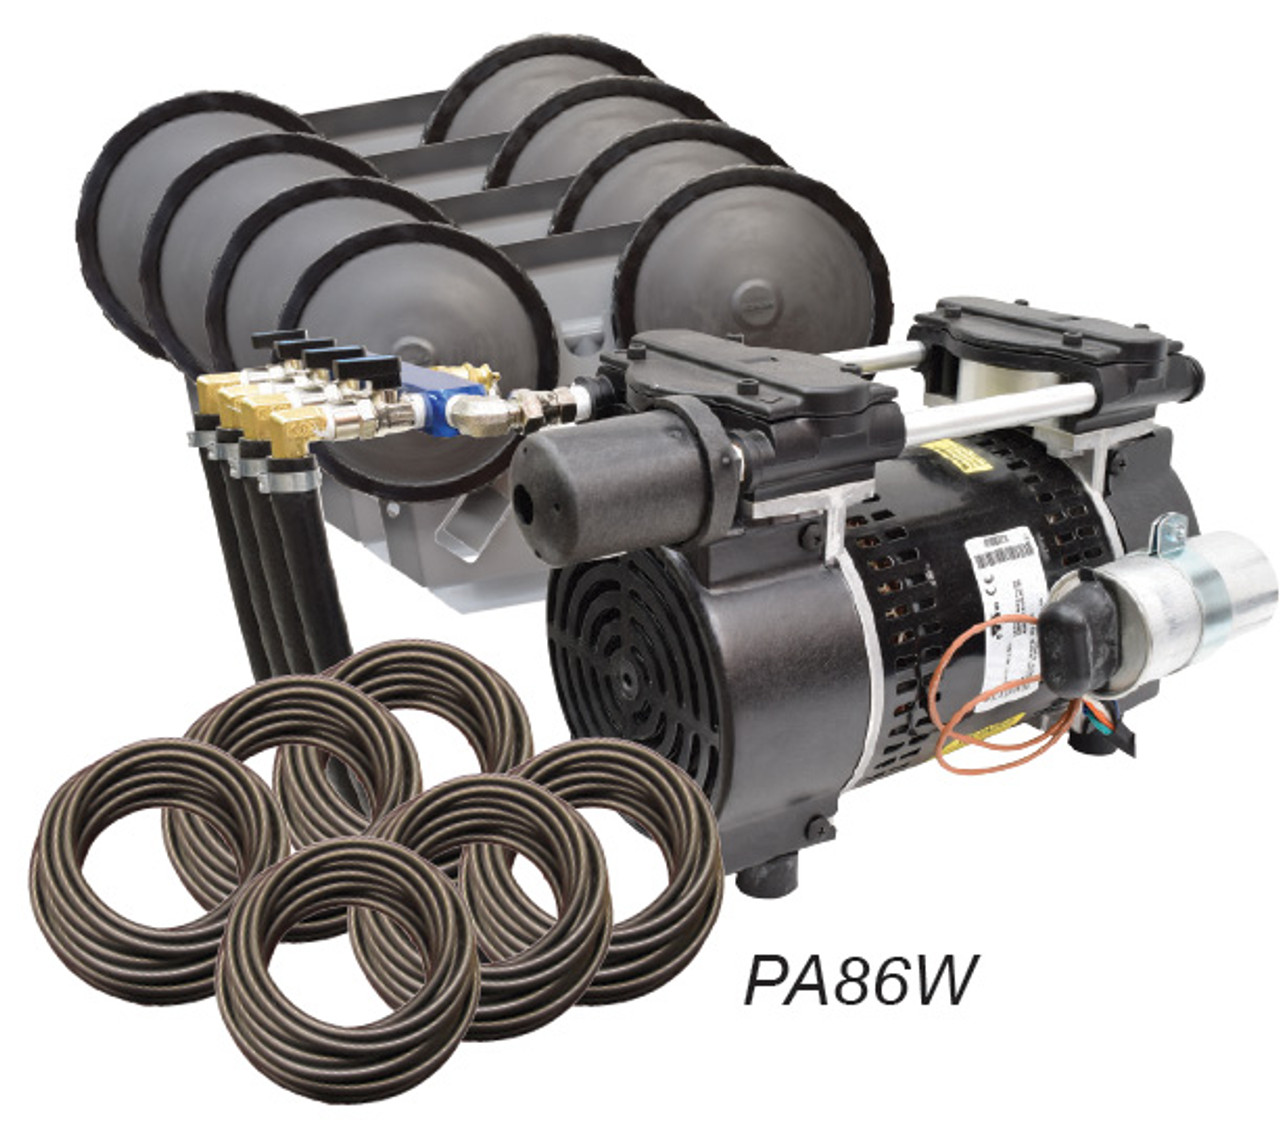 3/4 HP Stratus Gen 2 Rocking Piston Aeration System includes Four valve manifold with pressure relief valve.